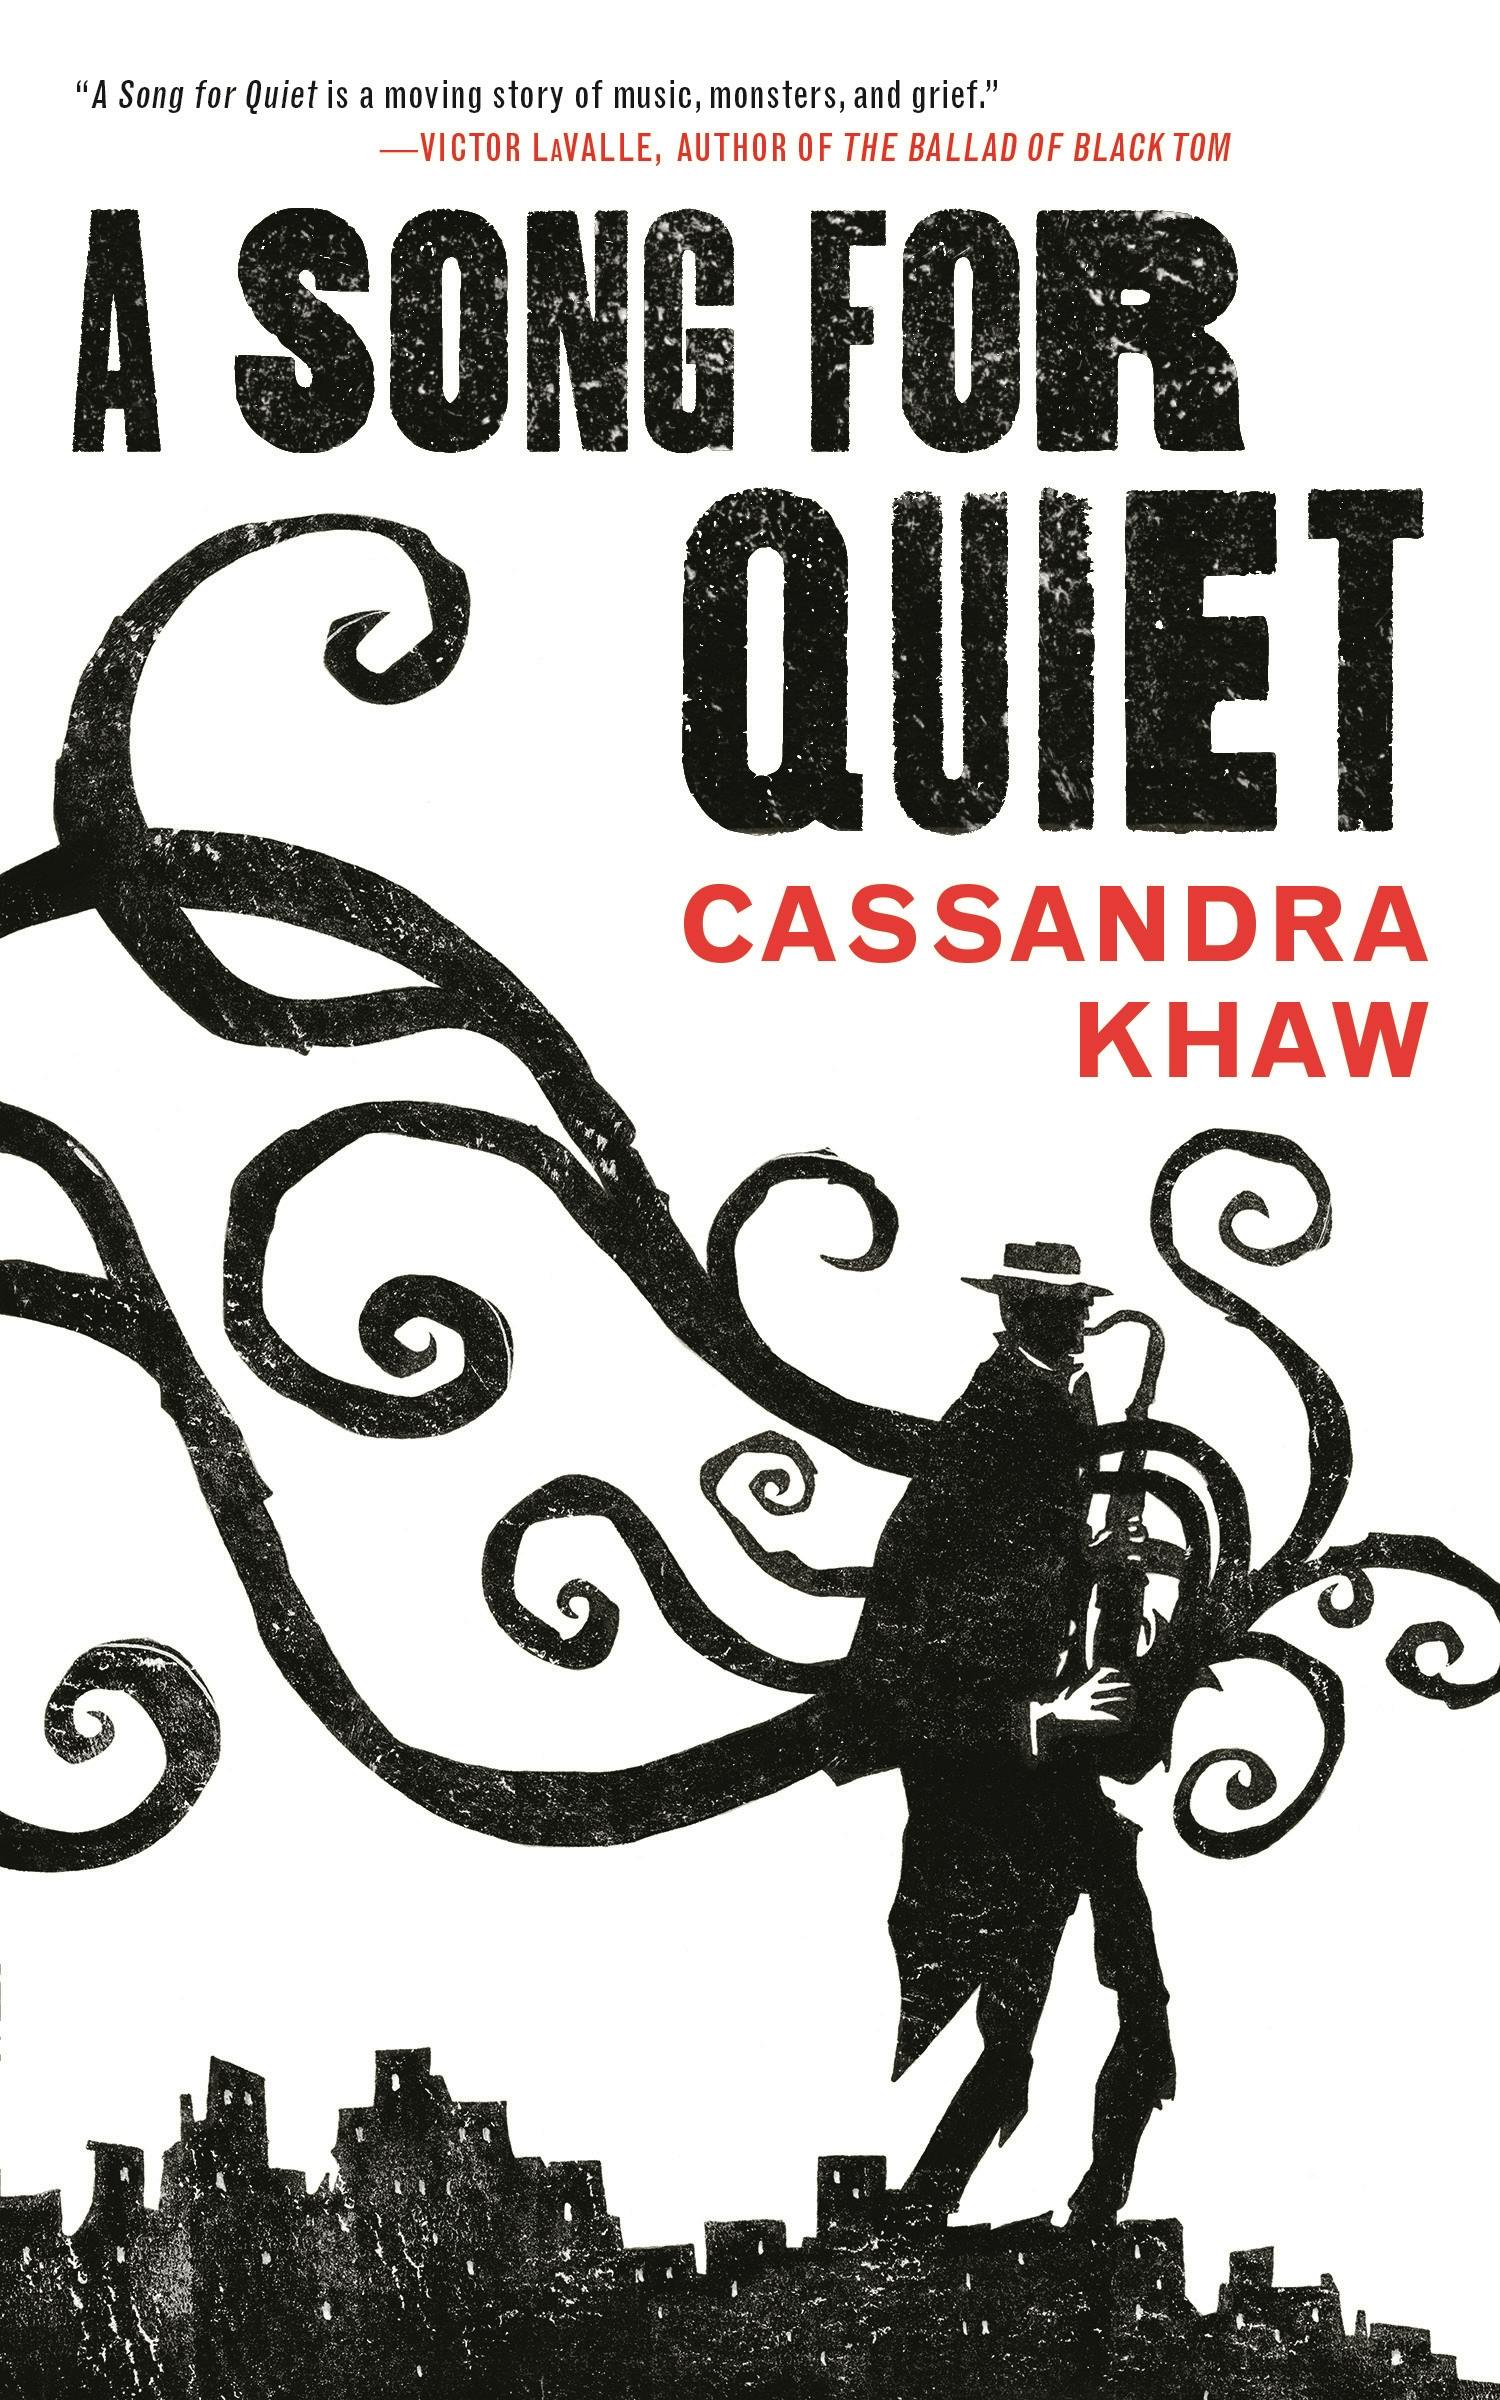 Cover for the book titled as: A Song for Quiet